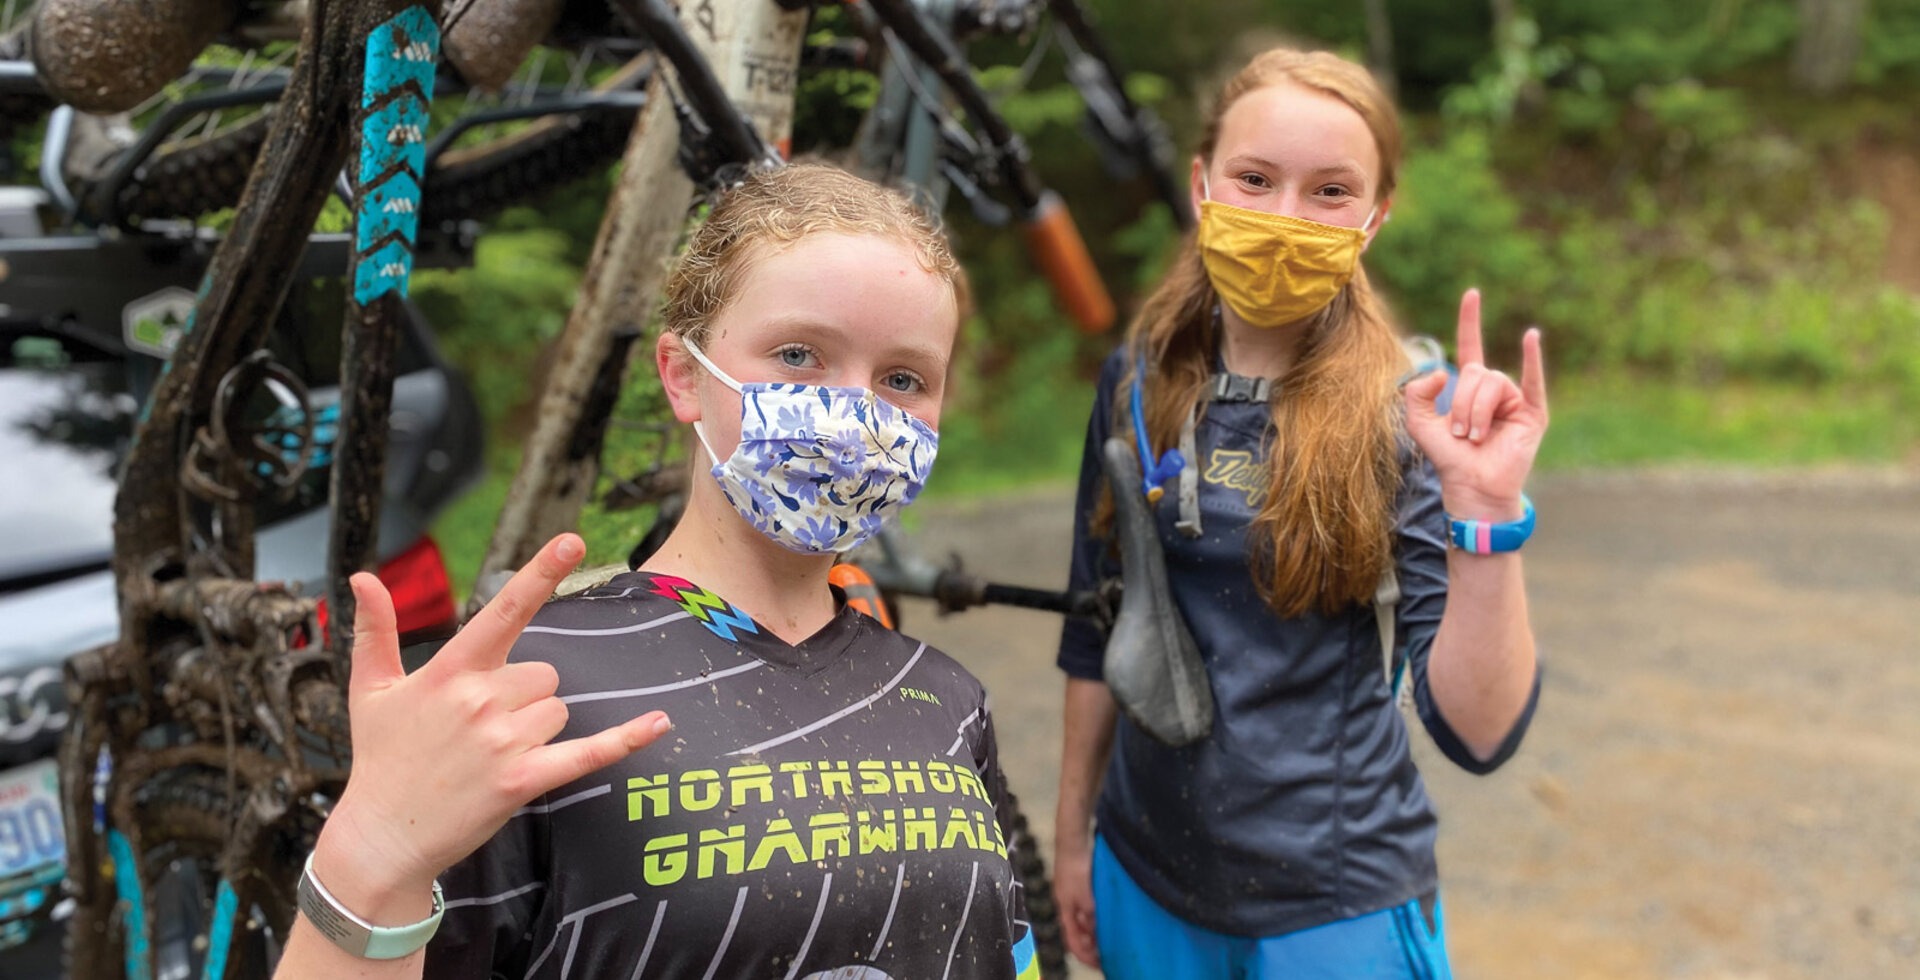 After joining the Northshore Gnarwhals youth mountain biking team in 2021, Elyse found solace in surrounding herself with peers who shared a love for biking and being outside.